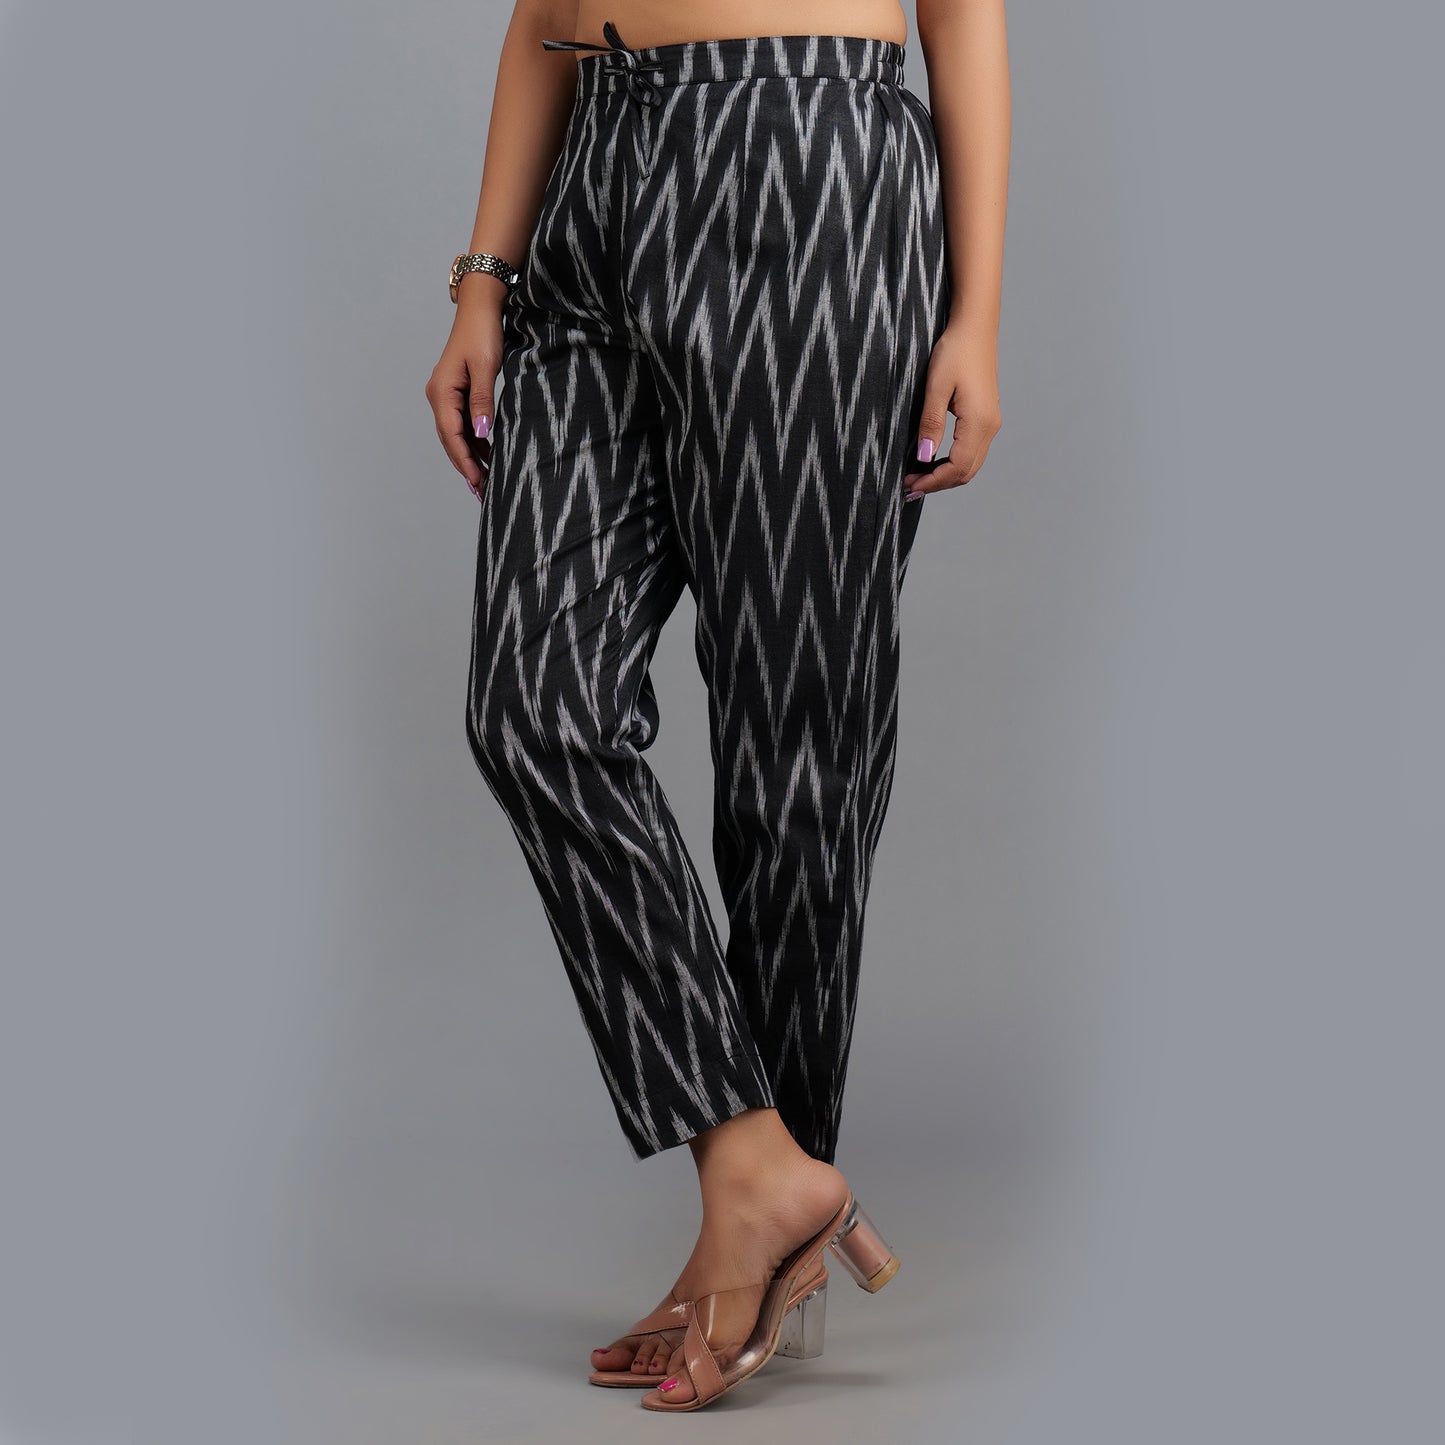 Cotton Printed Pants for ladies